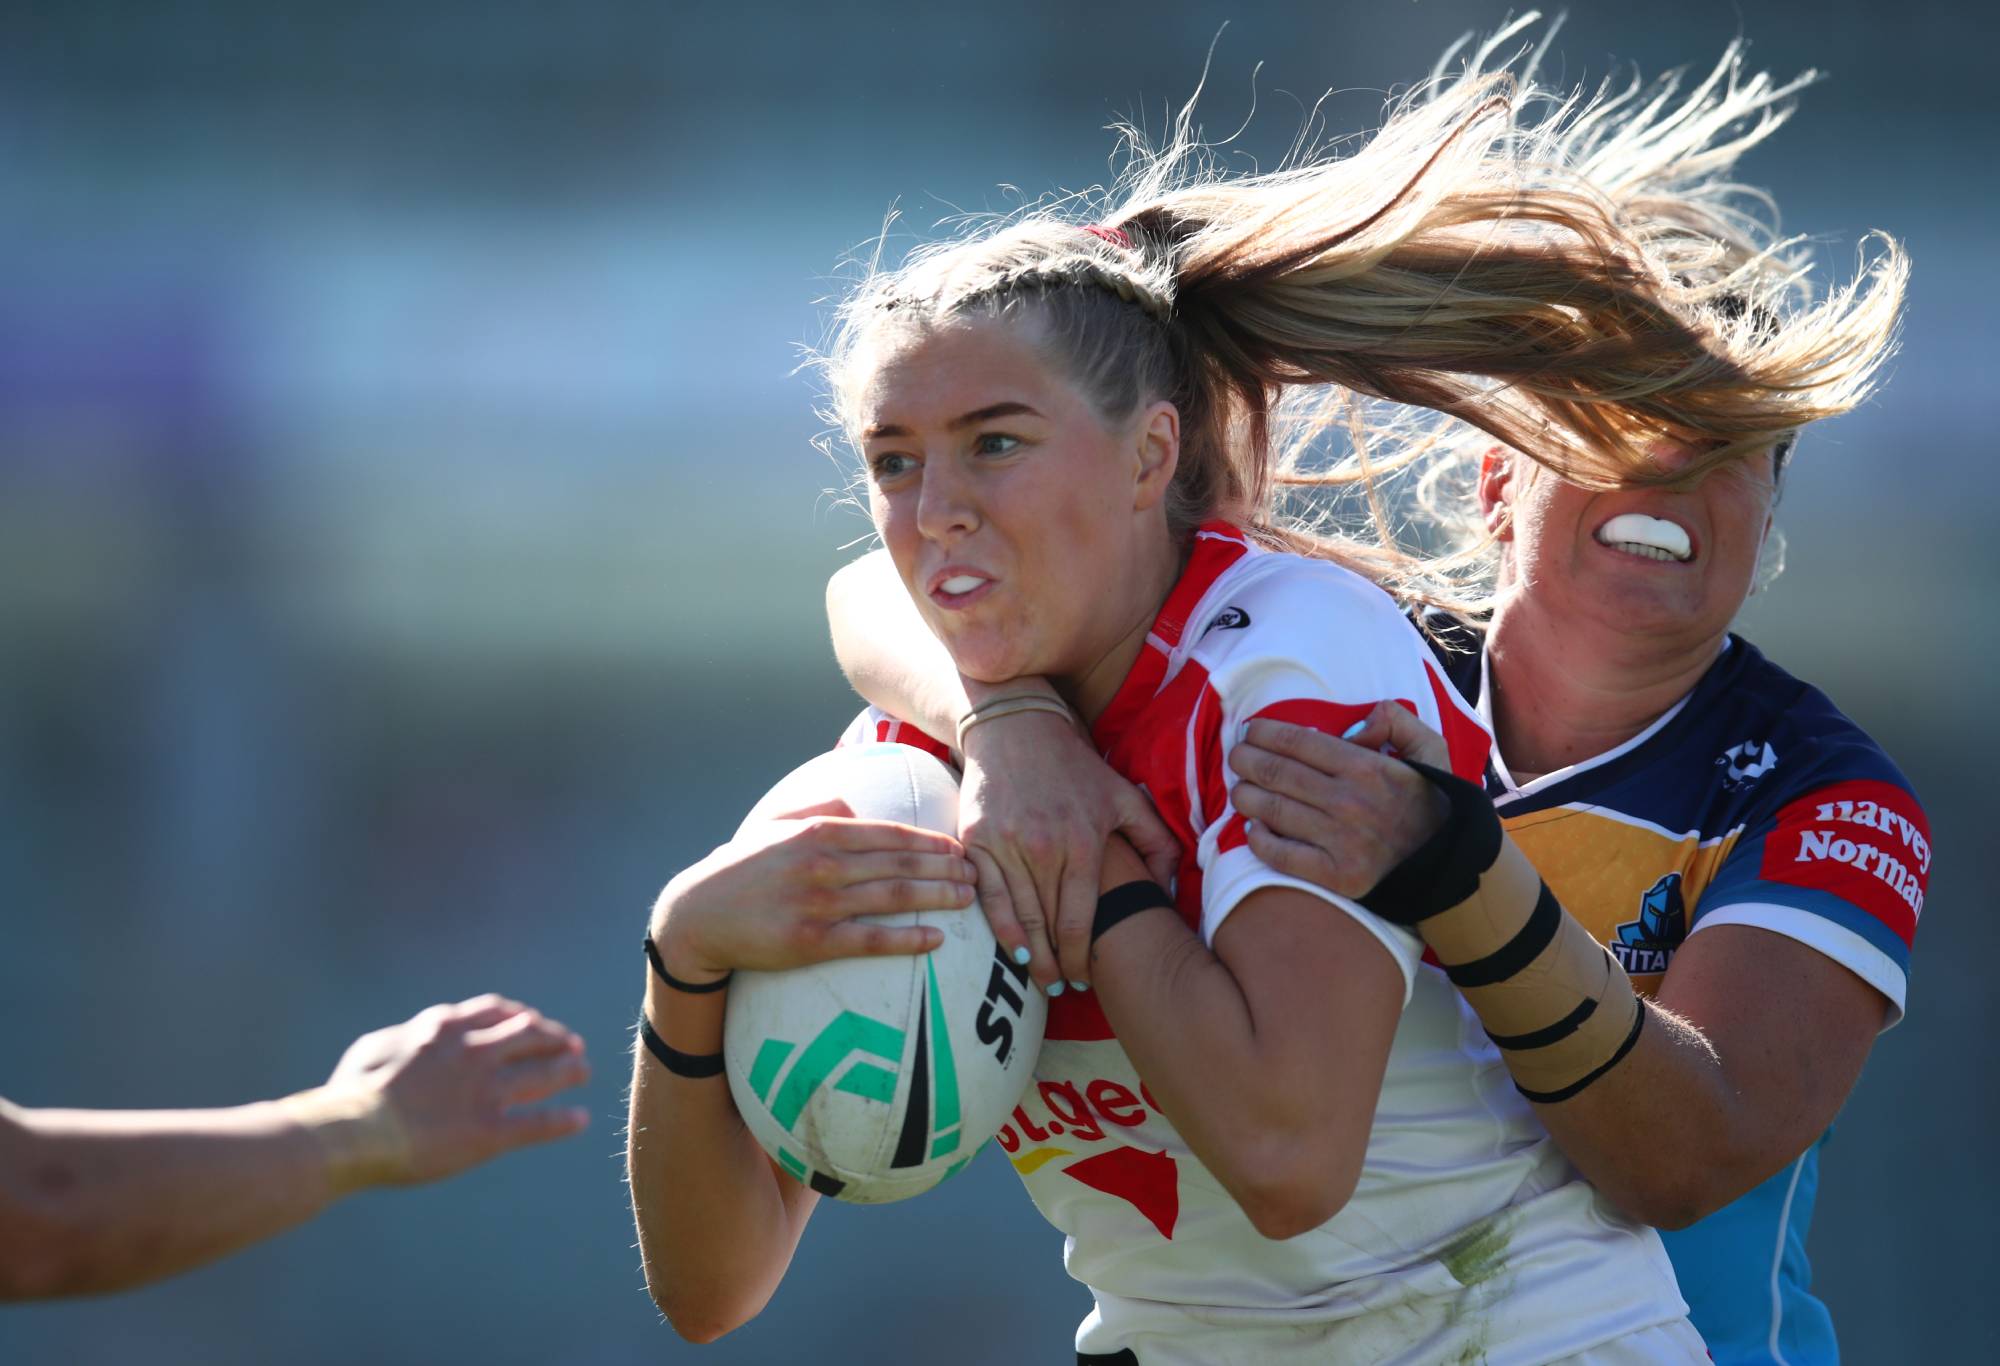 WOLLONGONG, AUSTRALIA - AUGUST 21: Teagan Berry of the Dragons is tackled during the round one NRLW match between St George Illawarra Dragons and Gold Coast Titans at WIN Stadium on August 21, 2022 in Wollongong, Australia. (Photo by Jason McCawley/Getty Images)